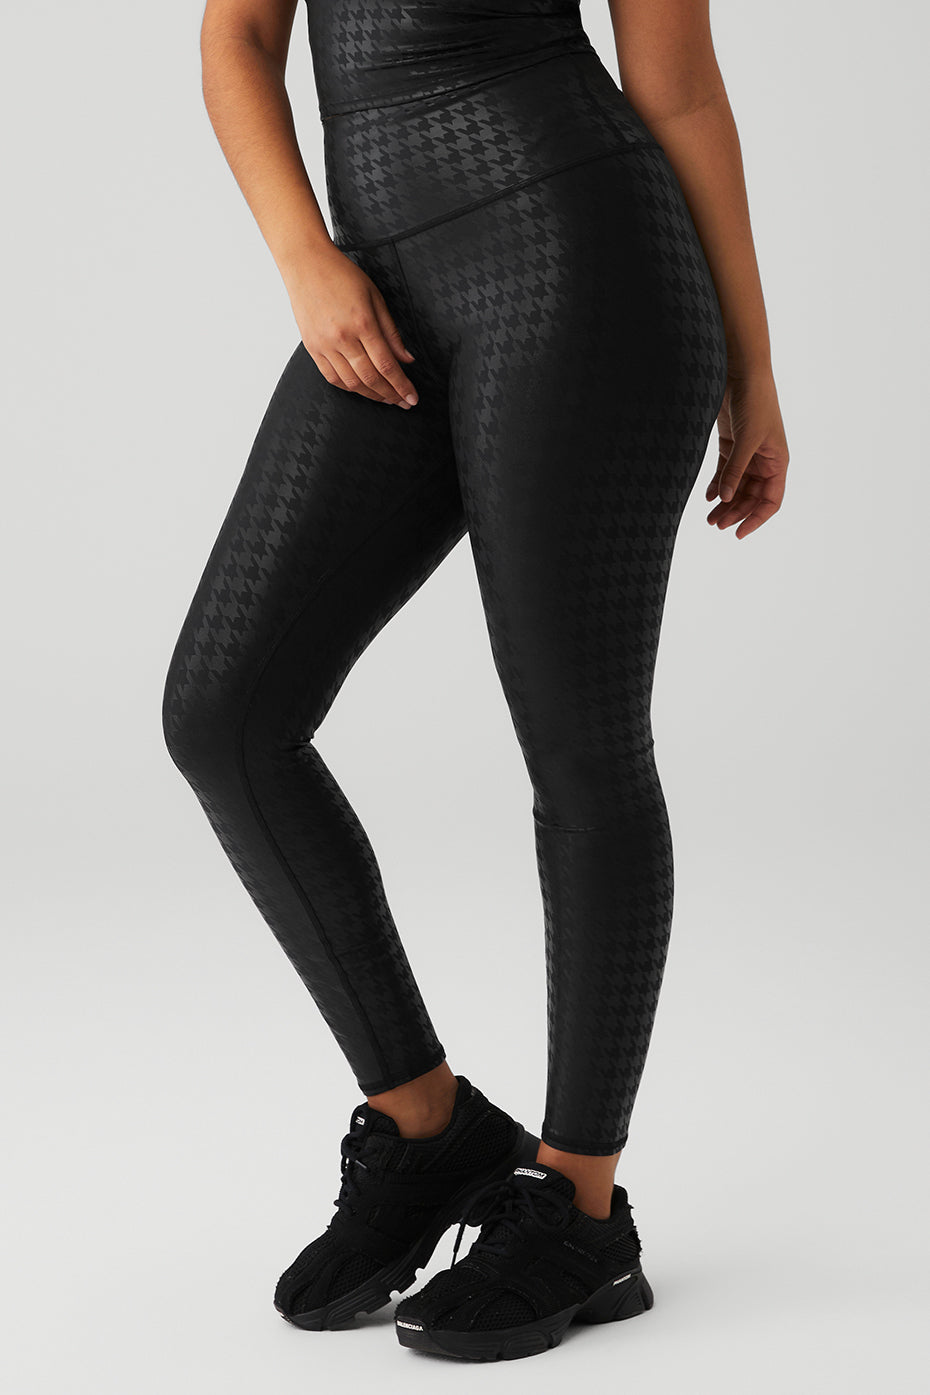 alo High Waist Airbrush Legging Jungle Houndstooth W5473SR - Free Shipping  at Largo Drive